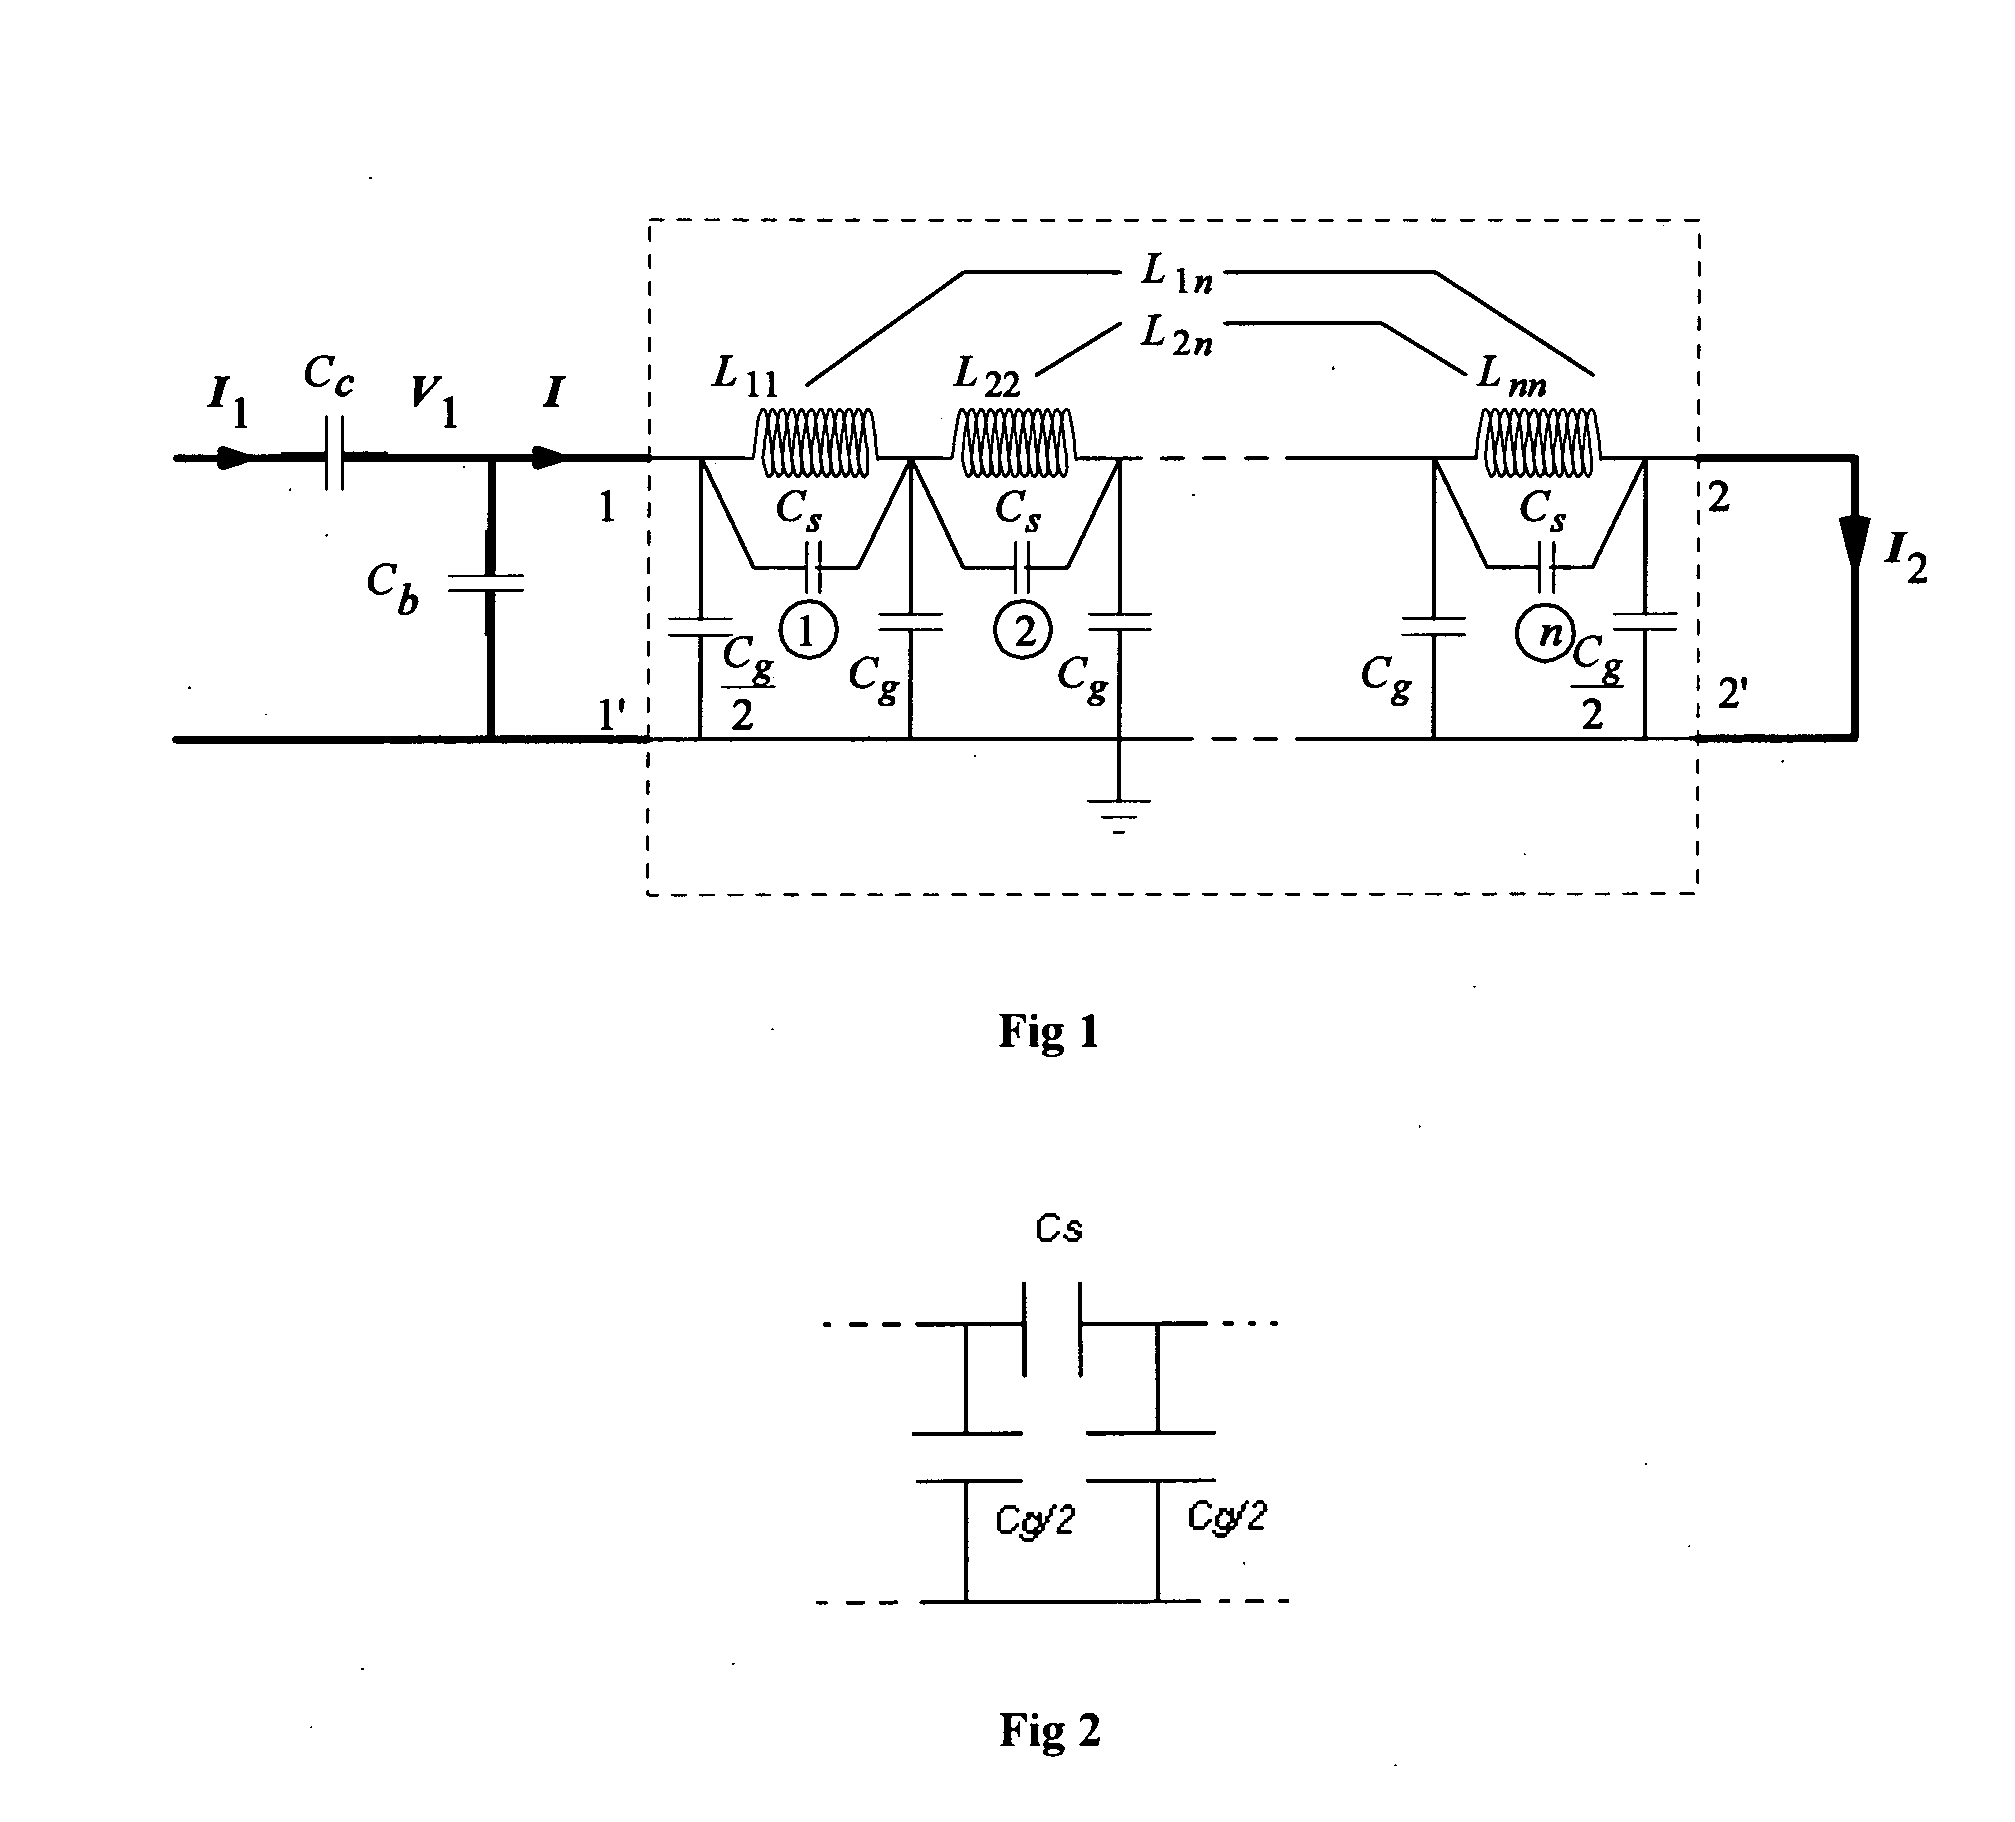 On-line diagnostic method for health monitoring of a transformer